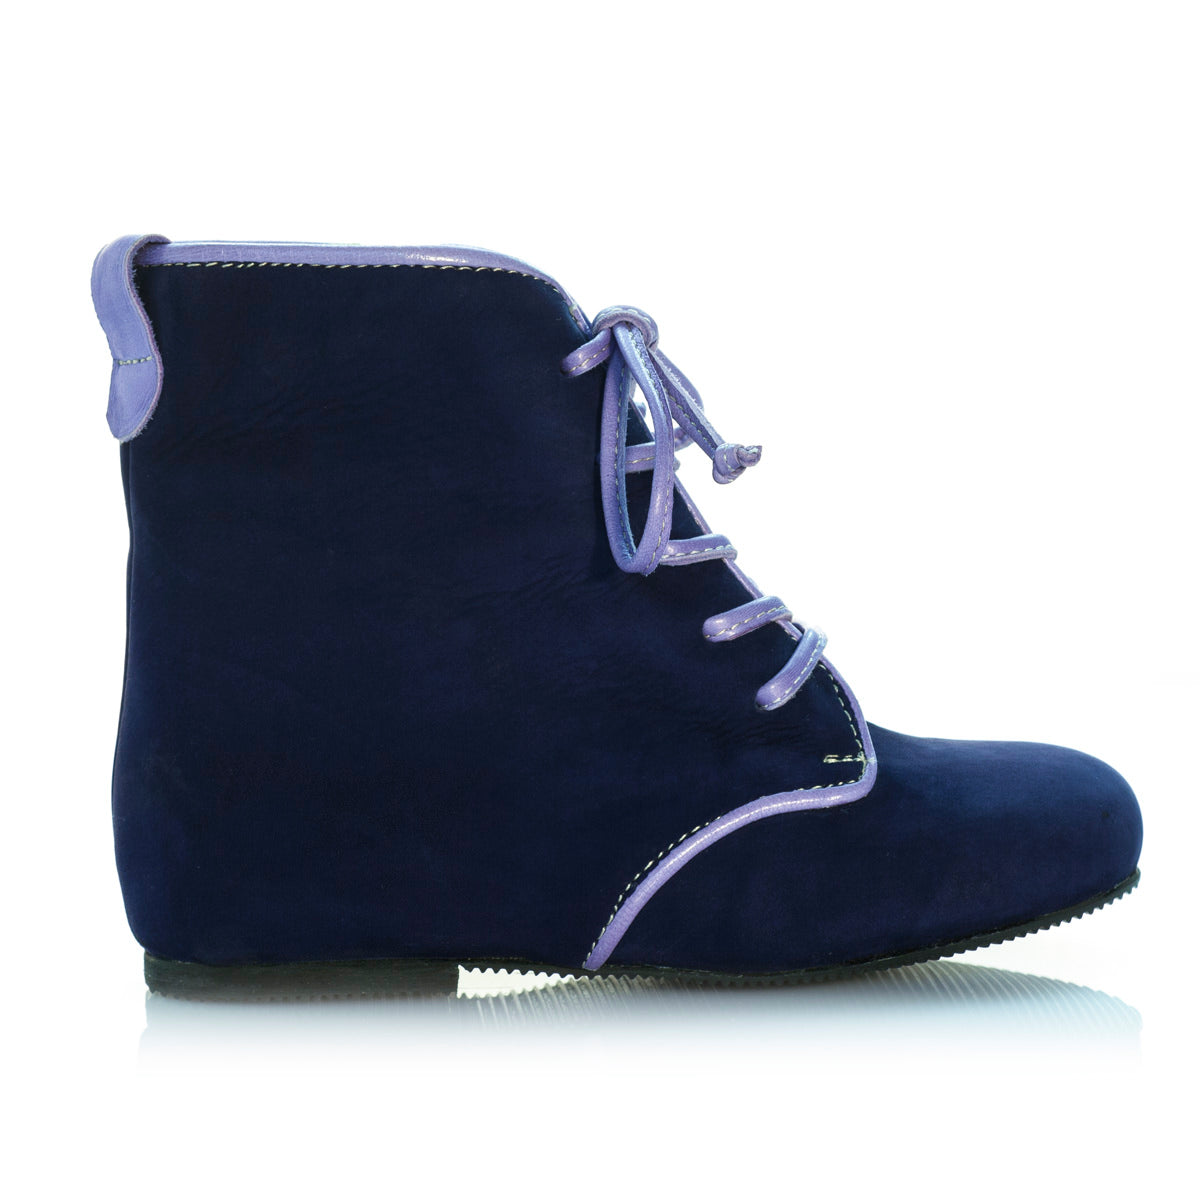 Vibys-Baby-Shoes-Dewberry-Blue-kids-laceup-leather-boots-side-view